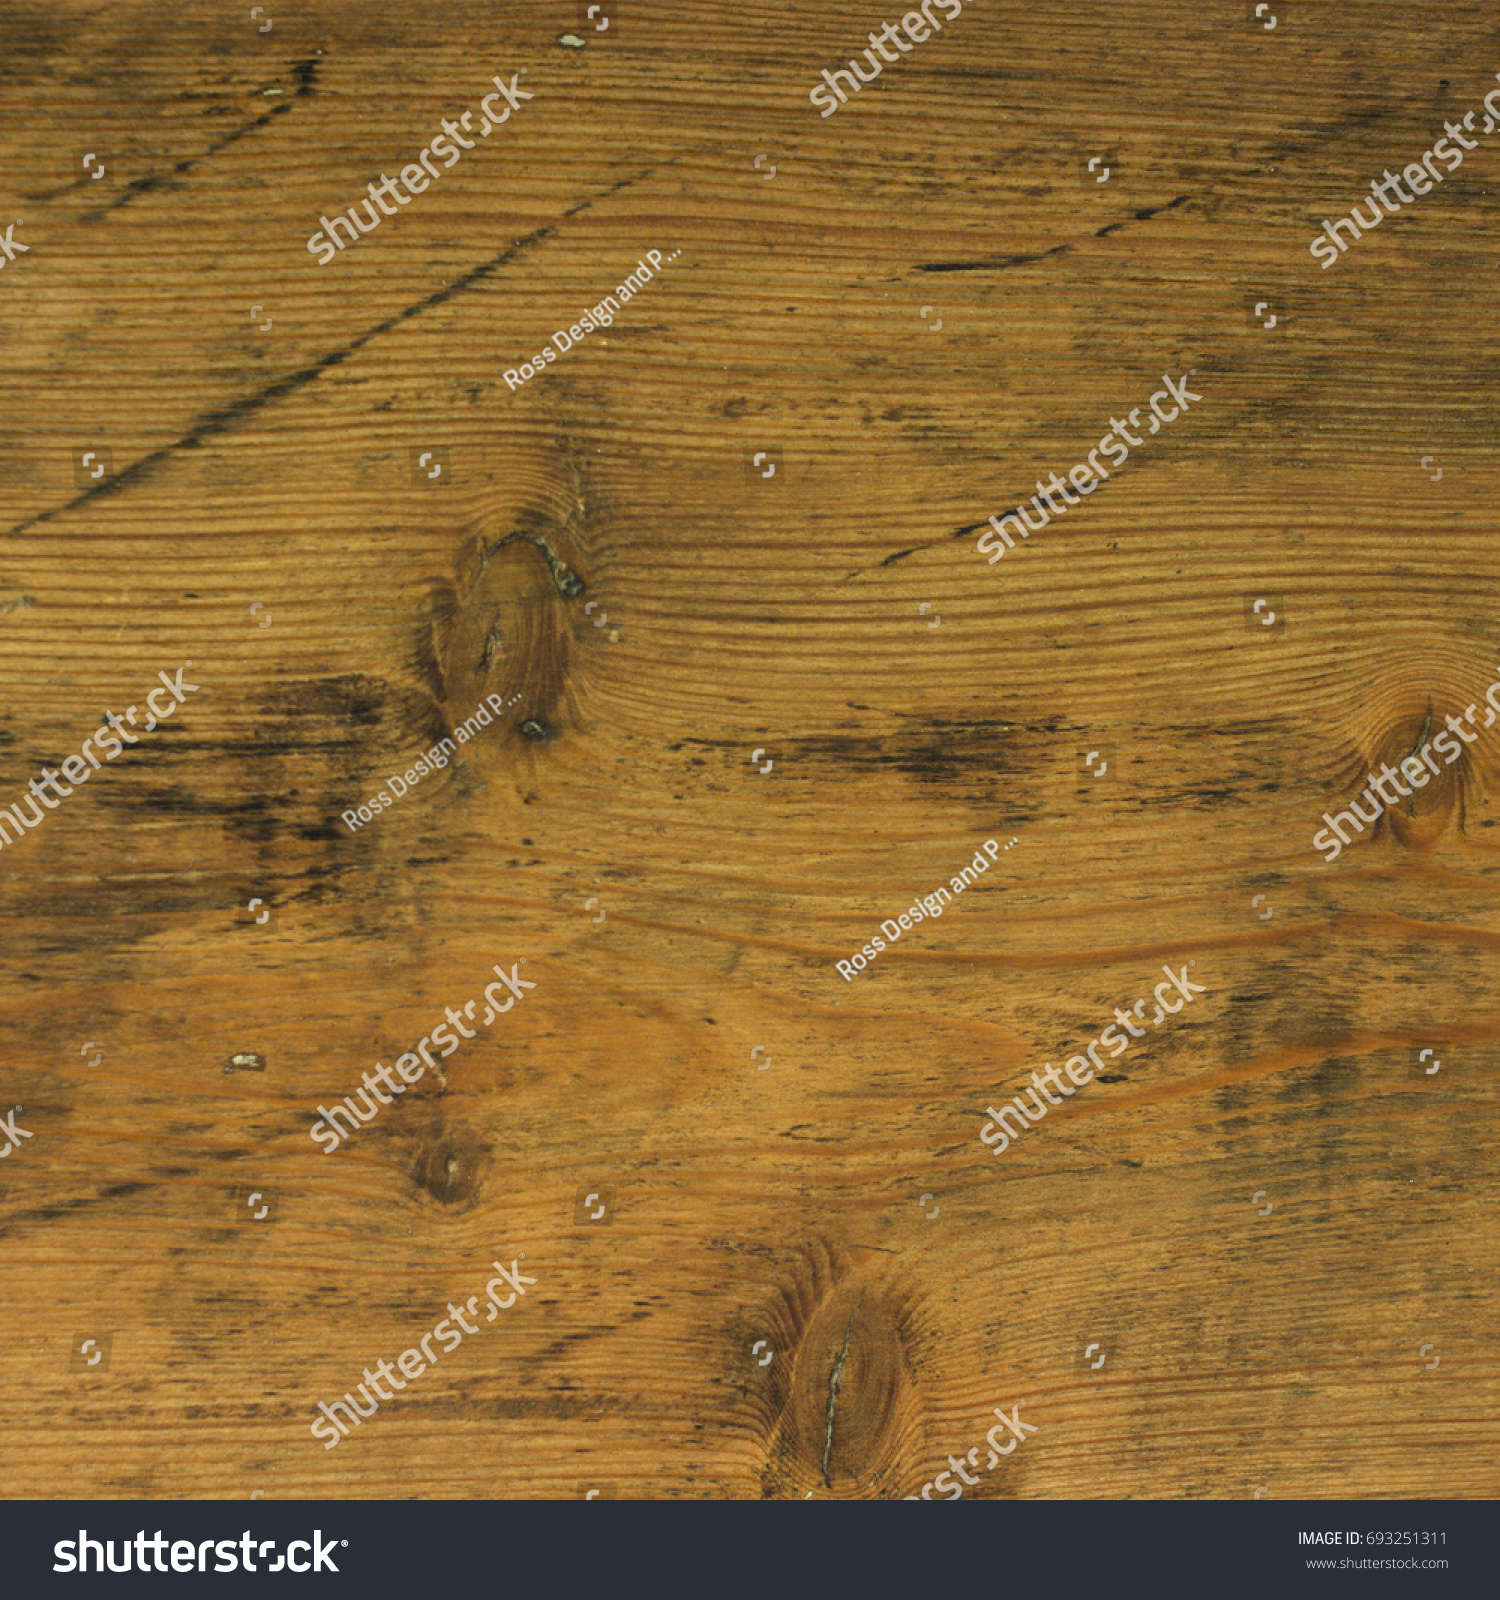 Old Worn Stained Pine Wood Stock Photo 693251311 - Shutterstock